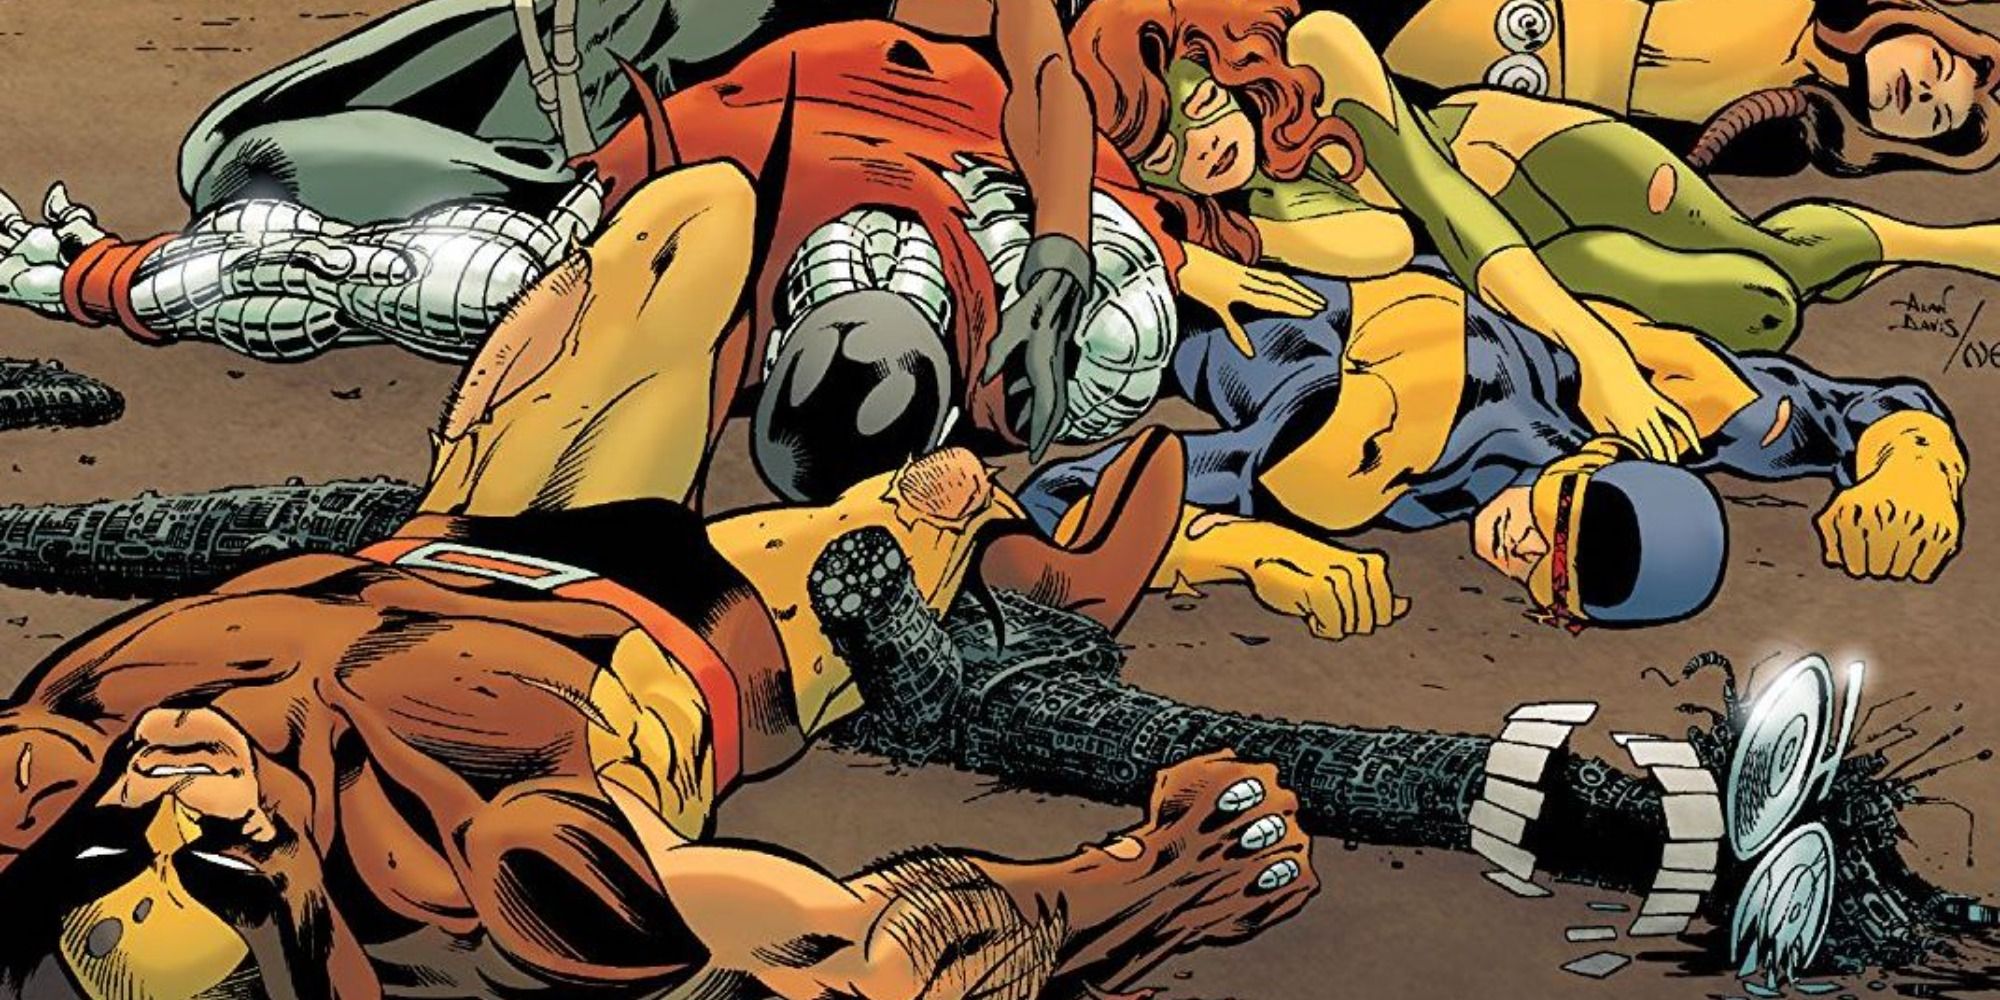 X Men lie defeated in The Fall of the Mutants comics.